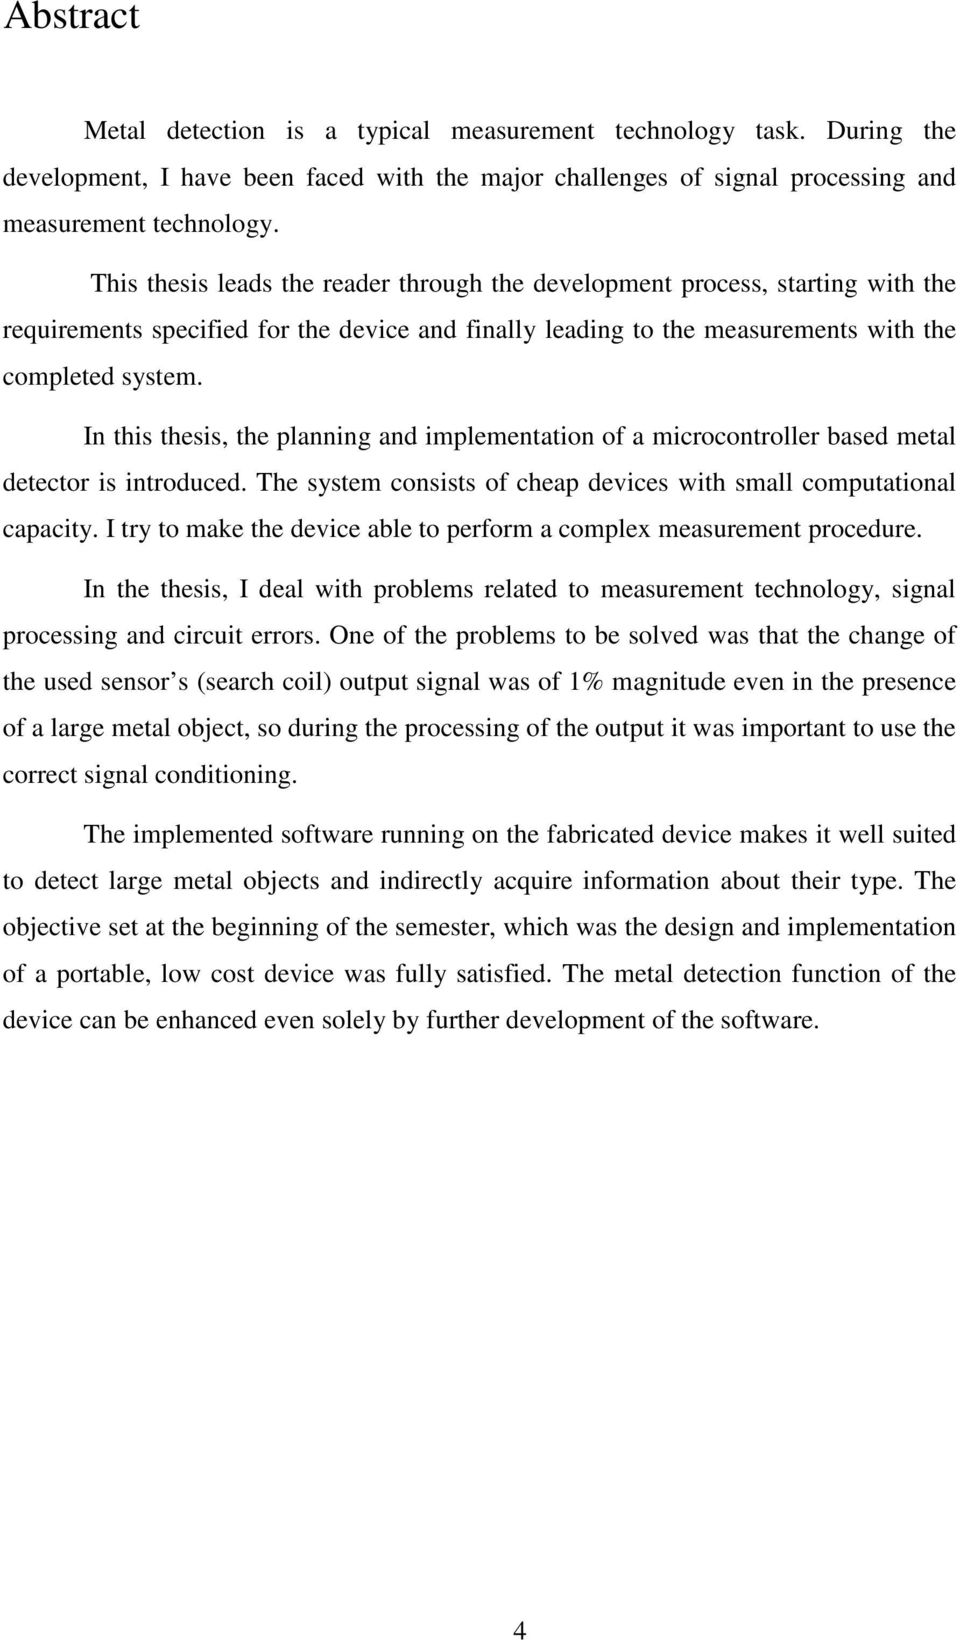 In this thesis, the planning and implementation of a microcontroller based metal detector is introduced. The system consists of cheap devices with small computational capacity.